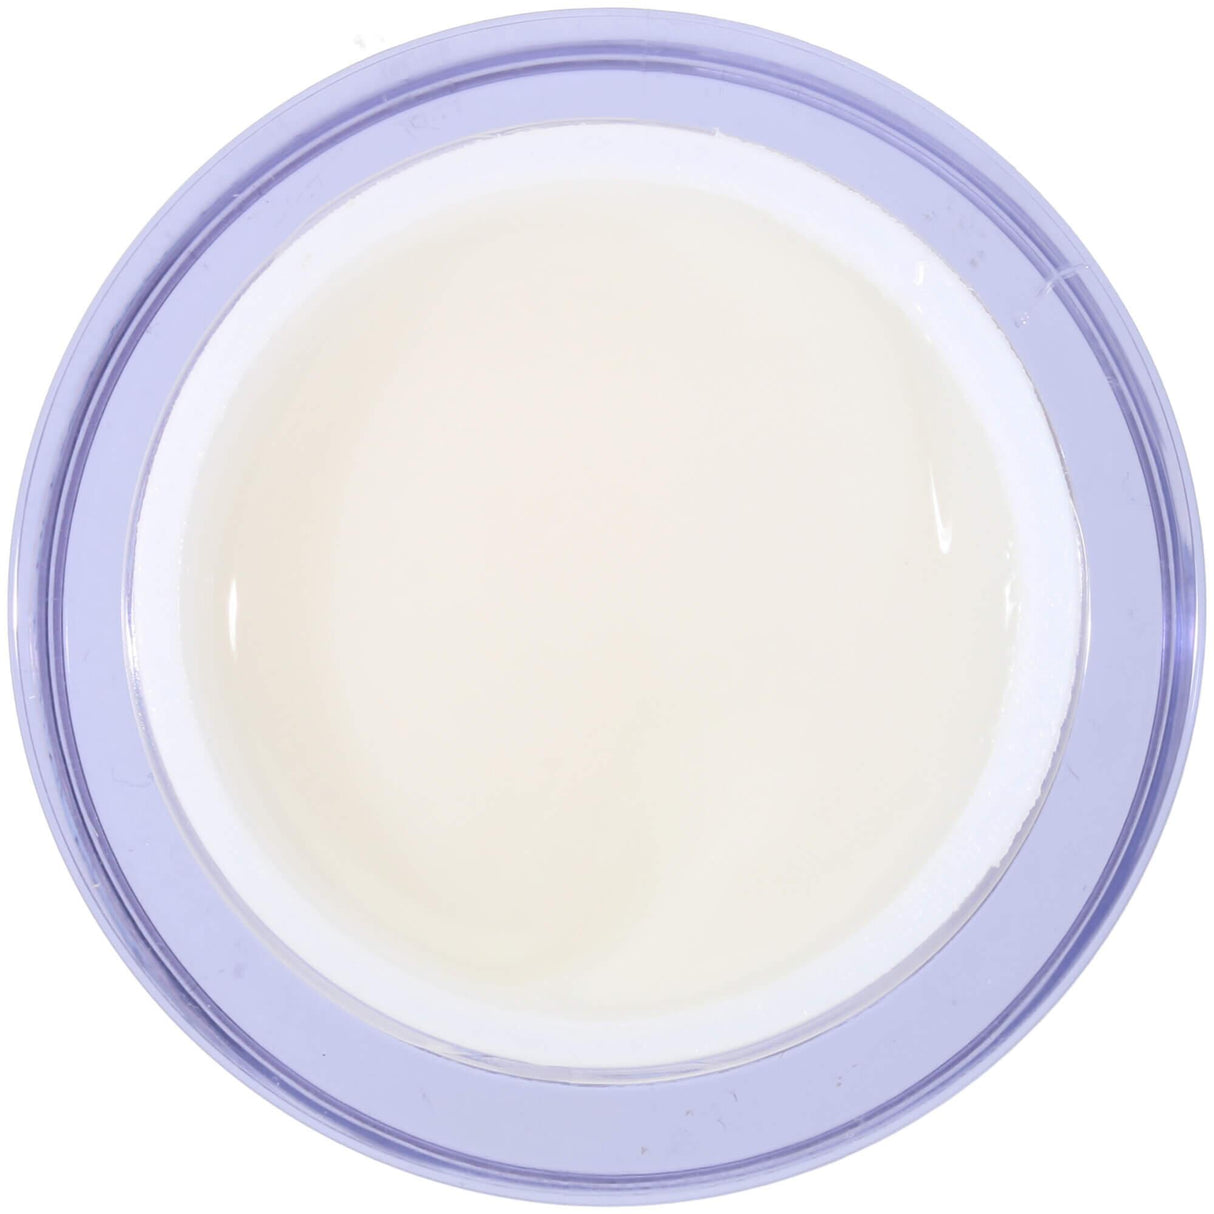 MSE Gel 521: Babyboomer white 50ml - MSE - The Beauty Company